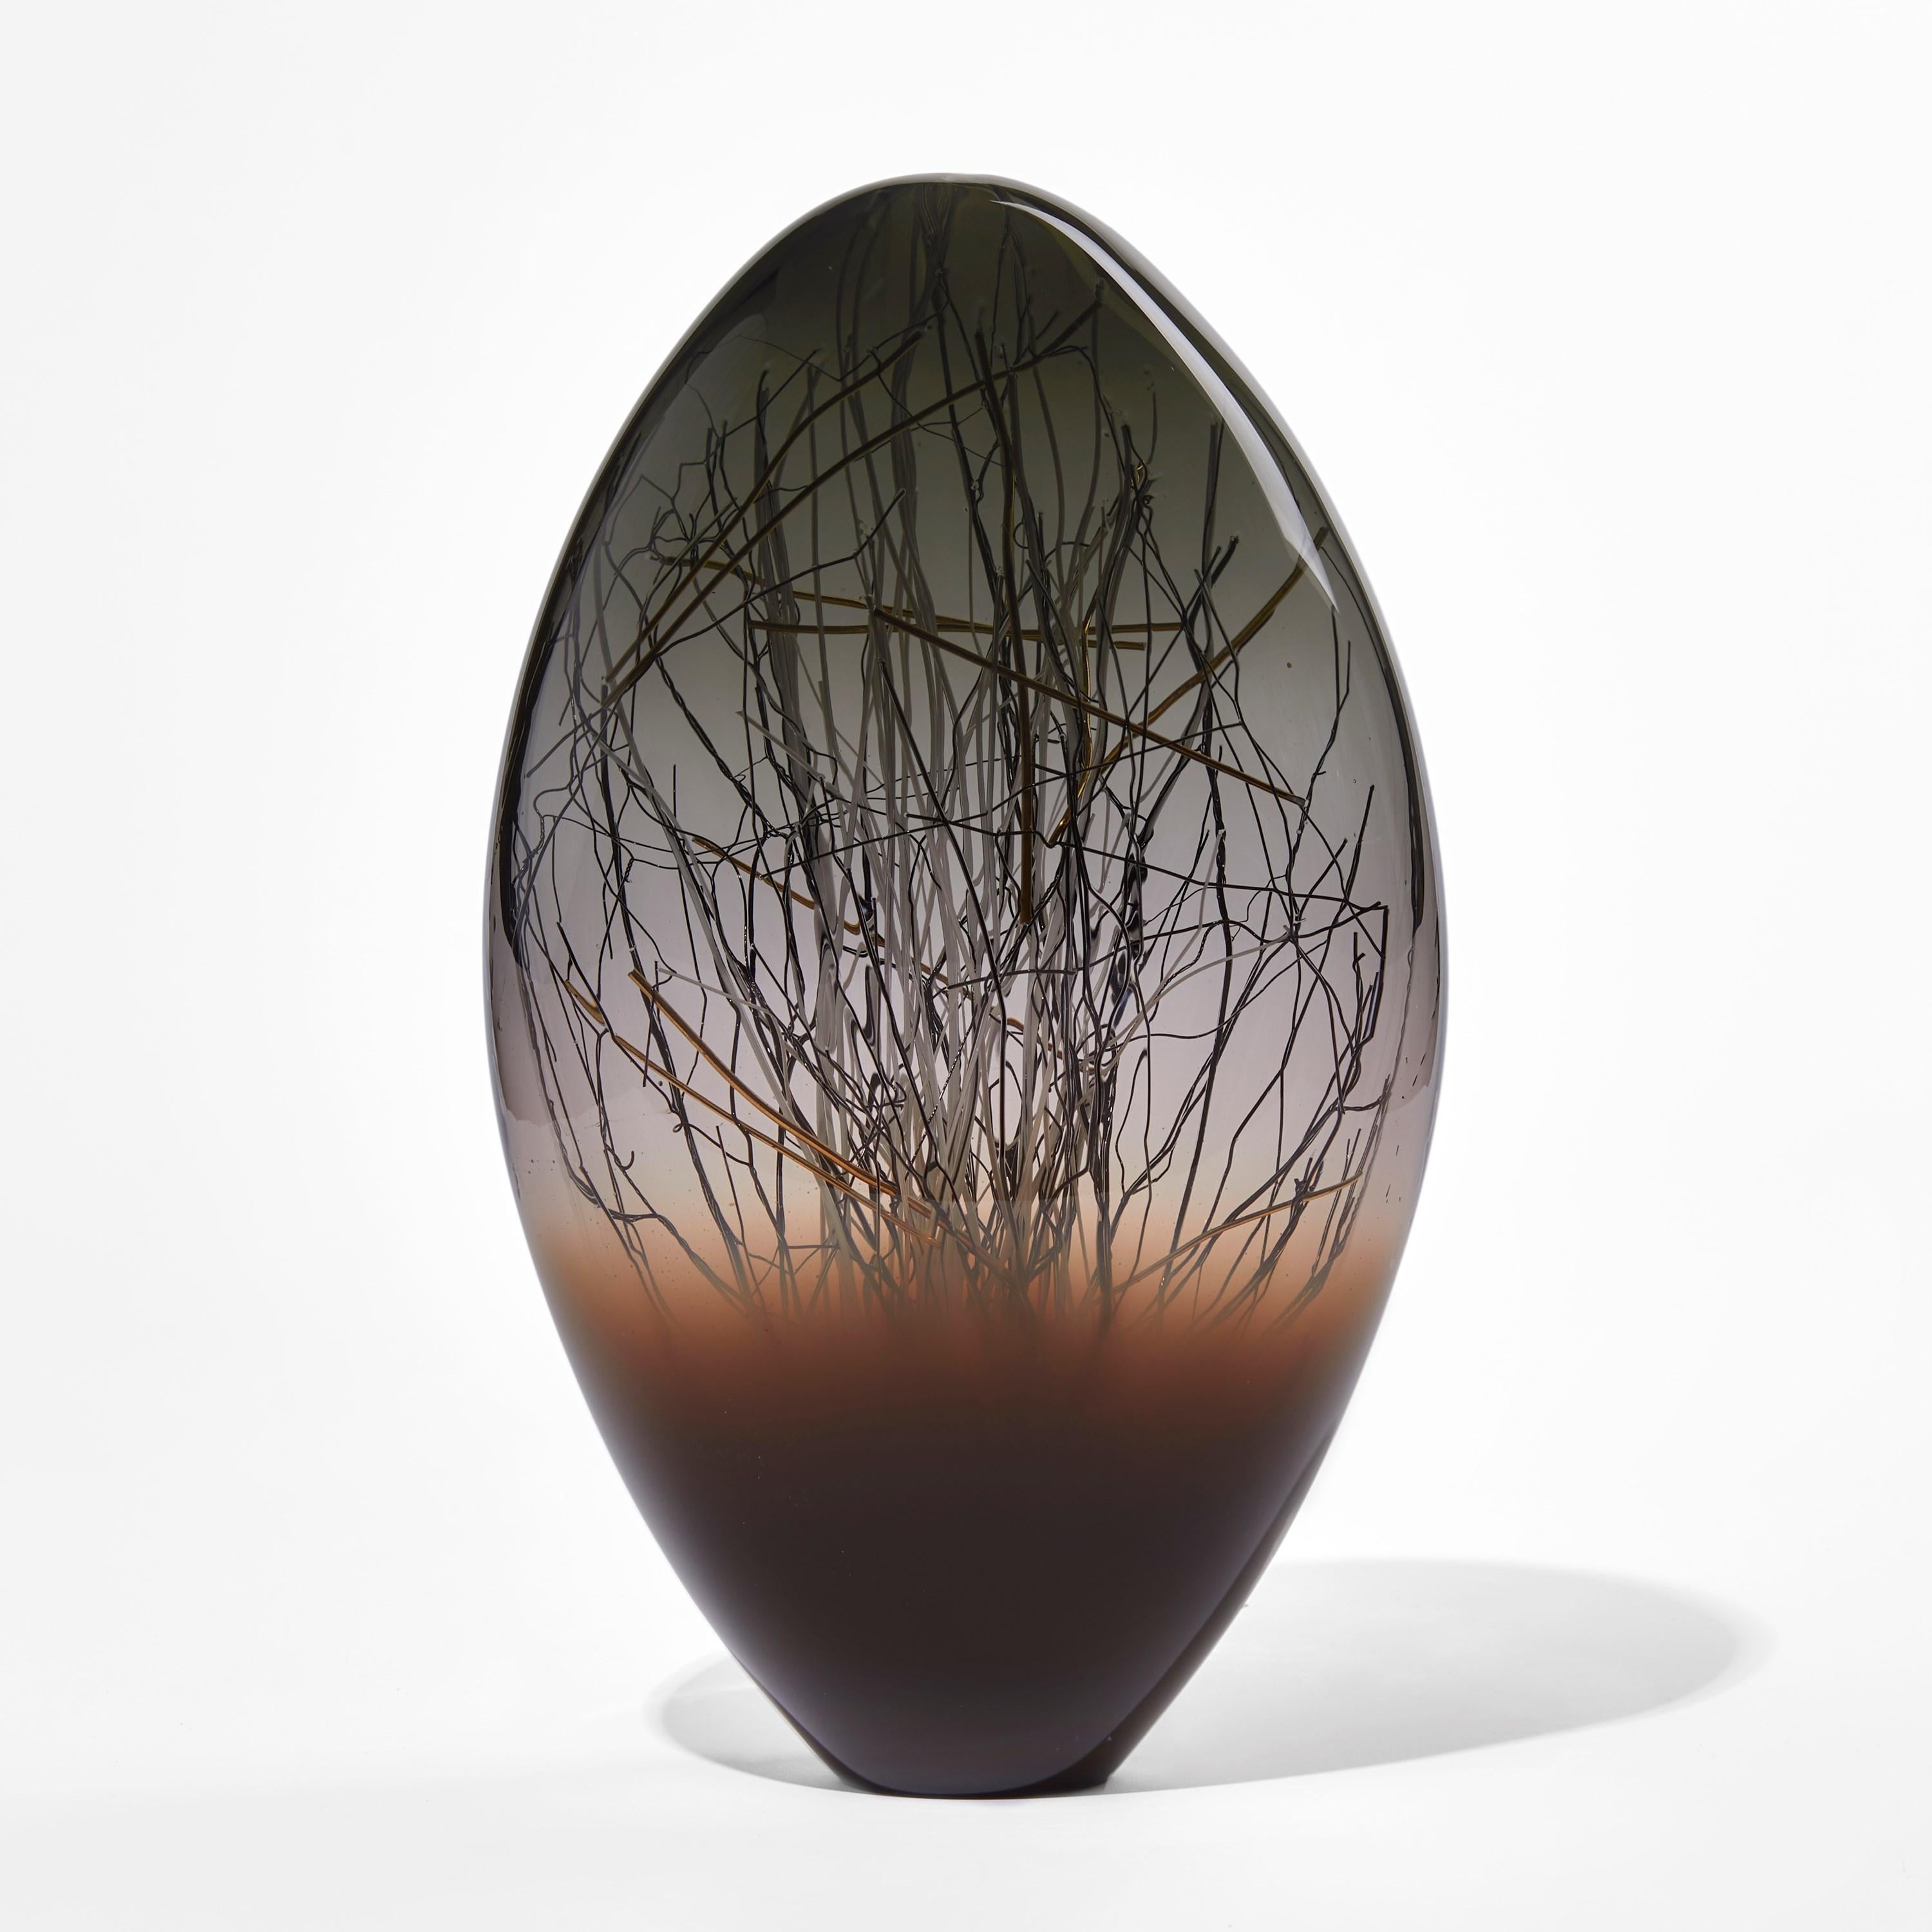 Ore Eclipse in Coffee & Grey is a unique glass sculpture in dark grey, rich brown, black and clear colored glass by the collaborative artists Hanne Enemark (Danish) and Louis Thompson (British). The outer glass form contains a multitude of fine